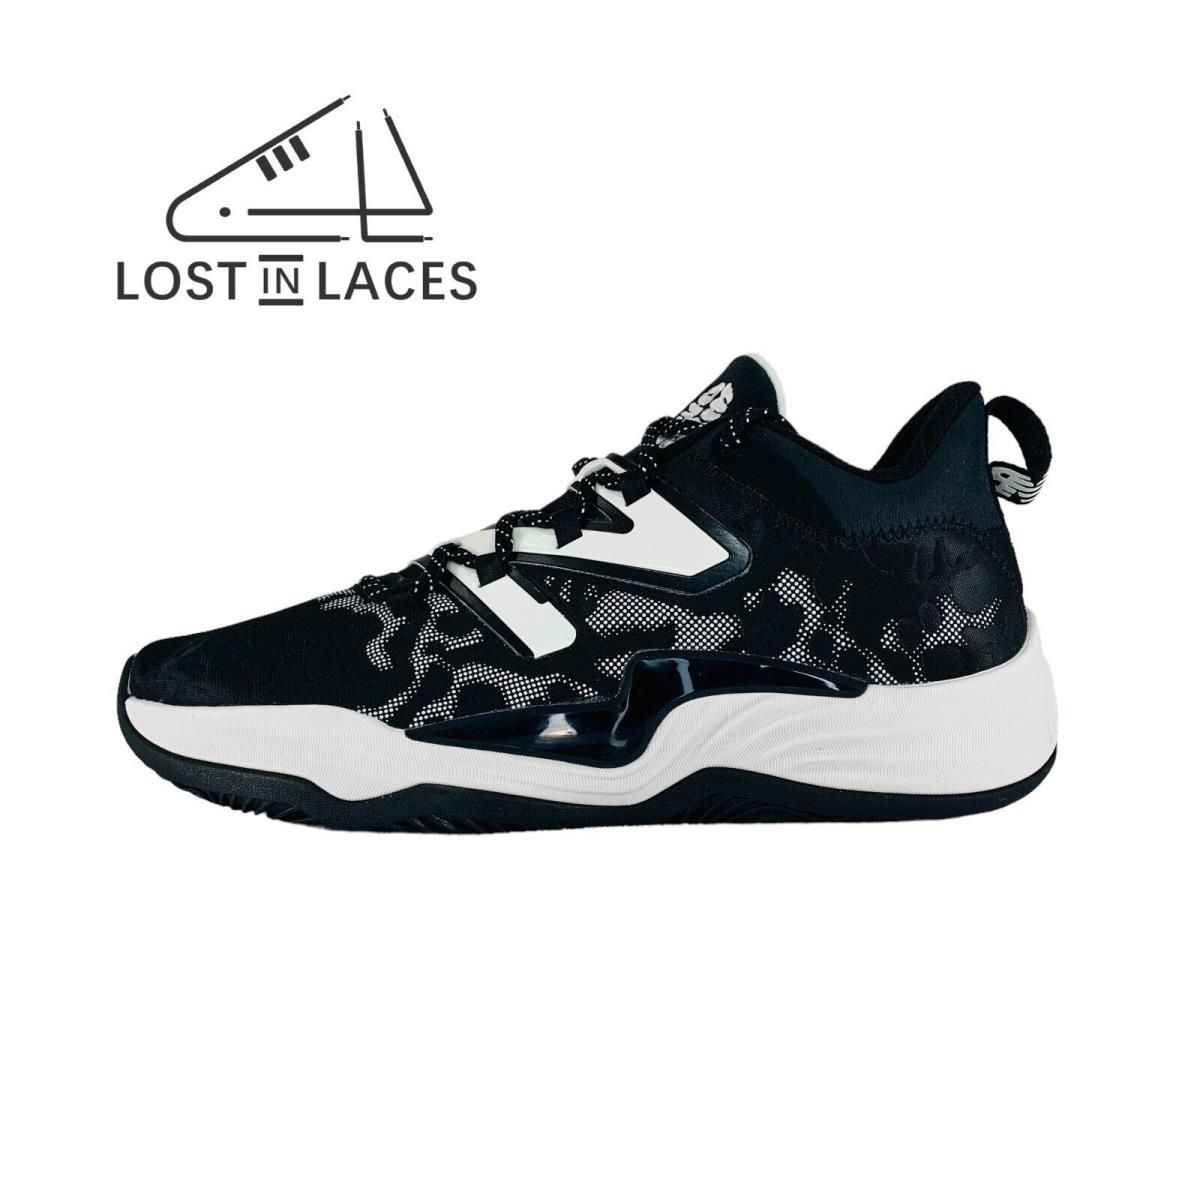 New Balance Two Wxy v3 Sneakers Black White New Men`s Basketball Shoes BB2WYTB3 - Black